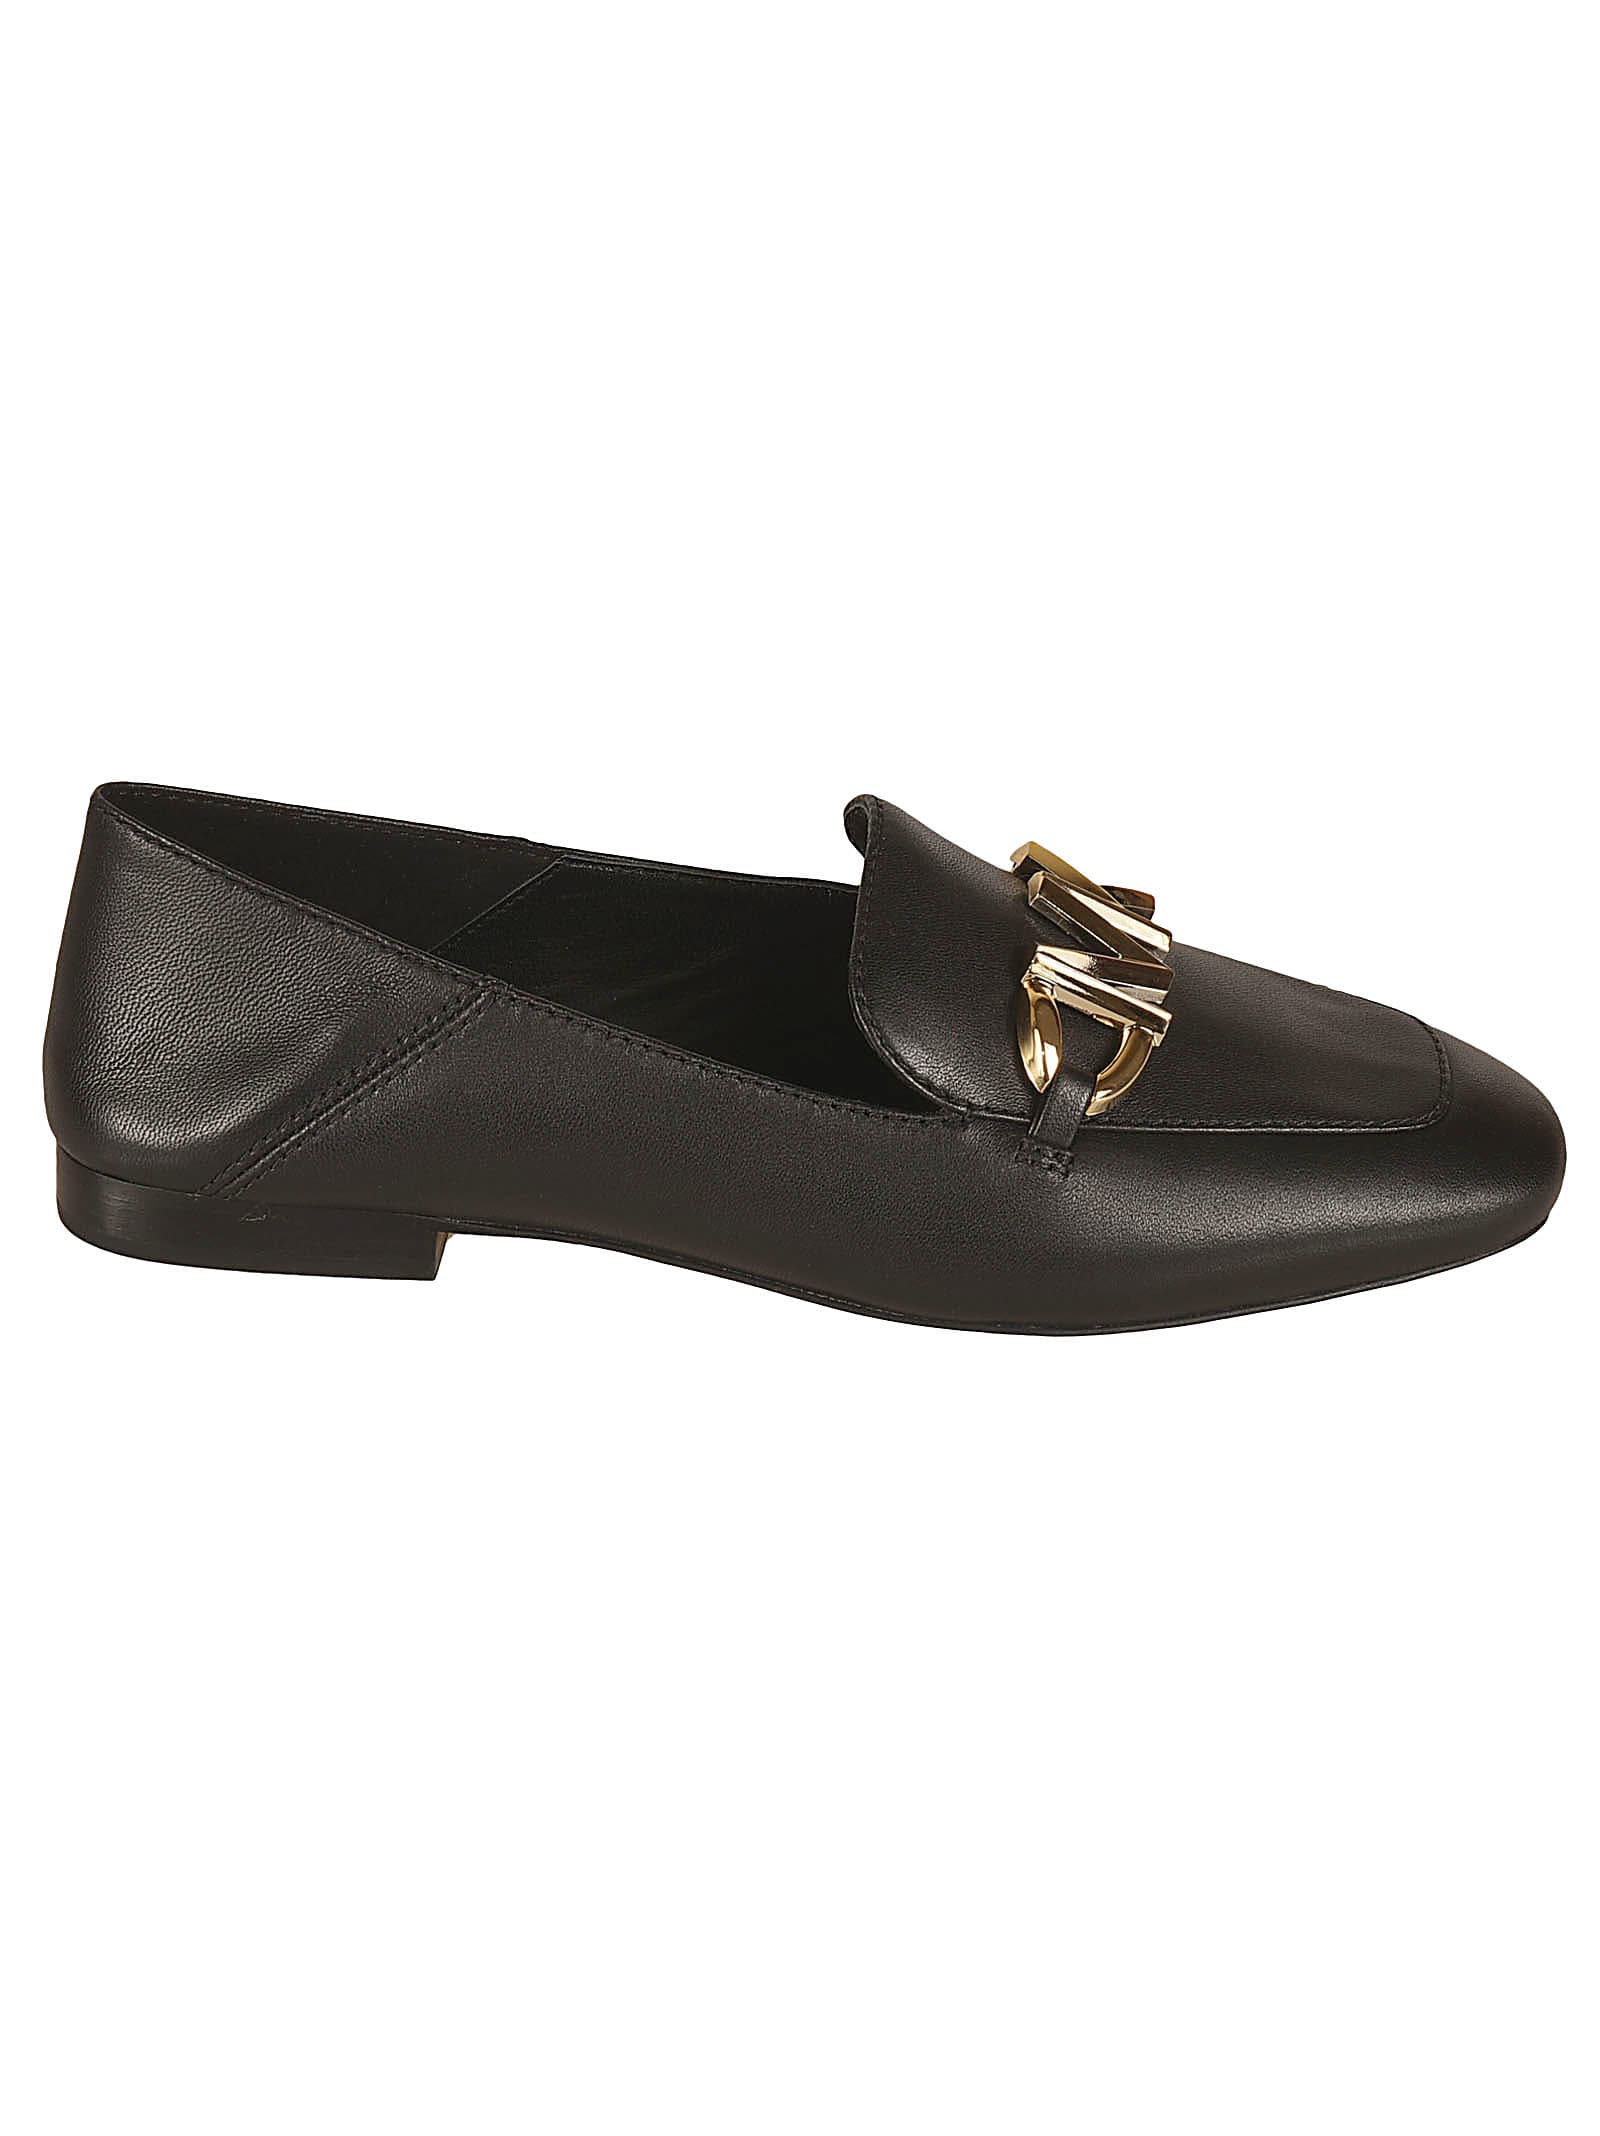 Michael Kors Izzy Loafers